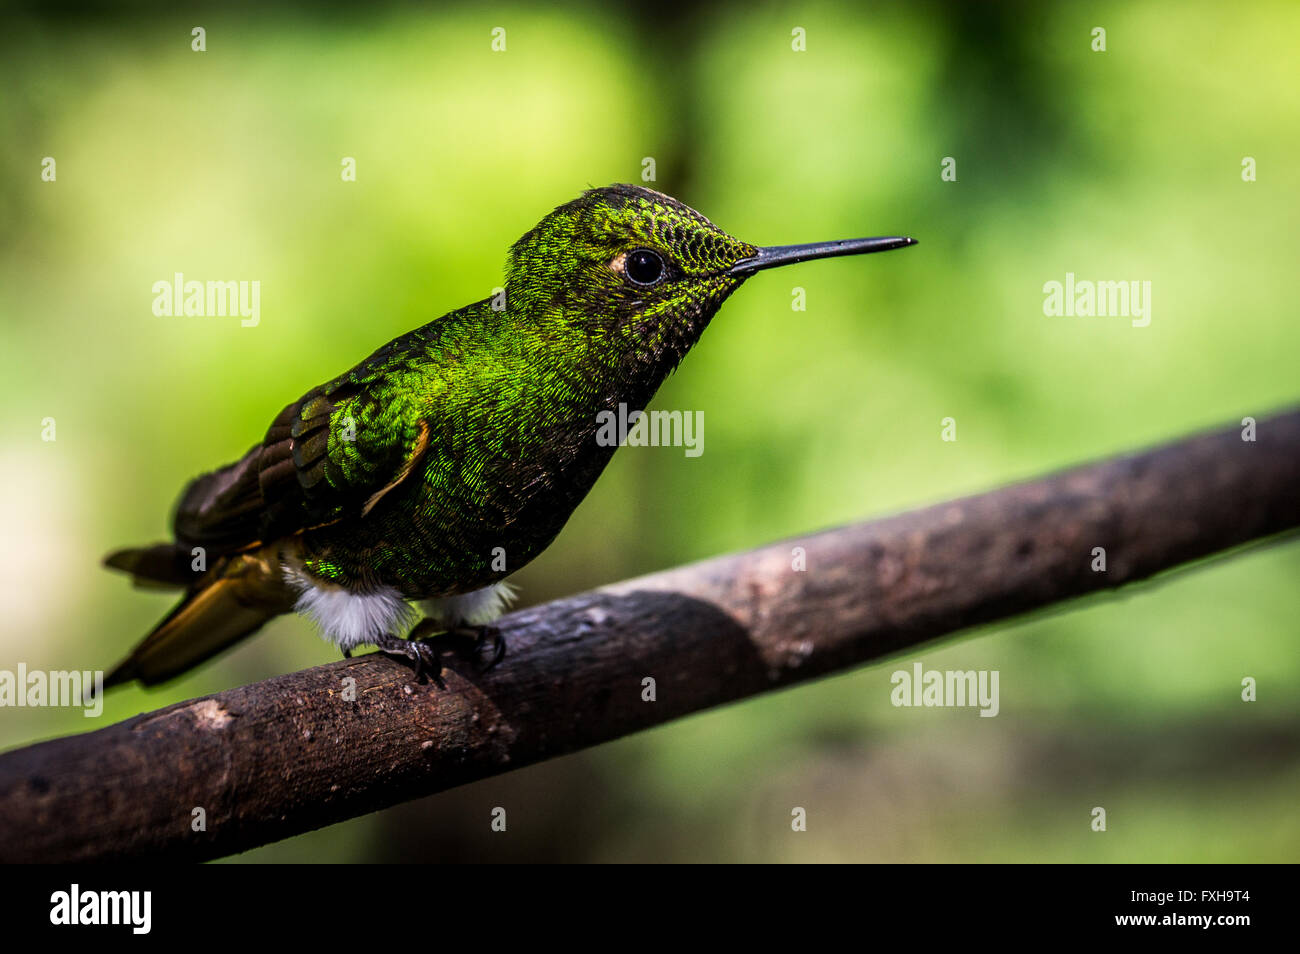 A green hummingbird sits on a branch. Hummingbirds are capable of moving their wings very fast. Stock Photo